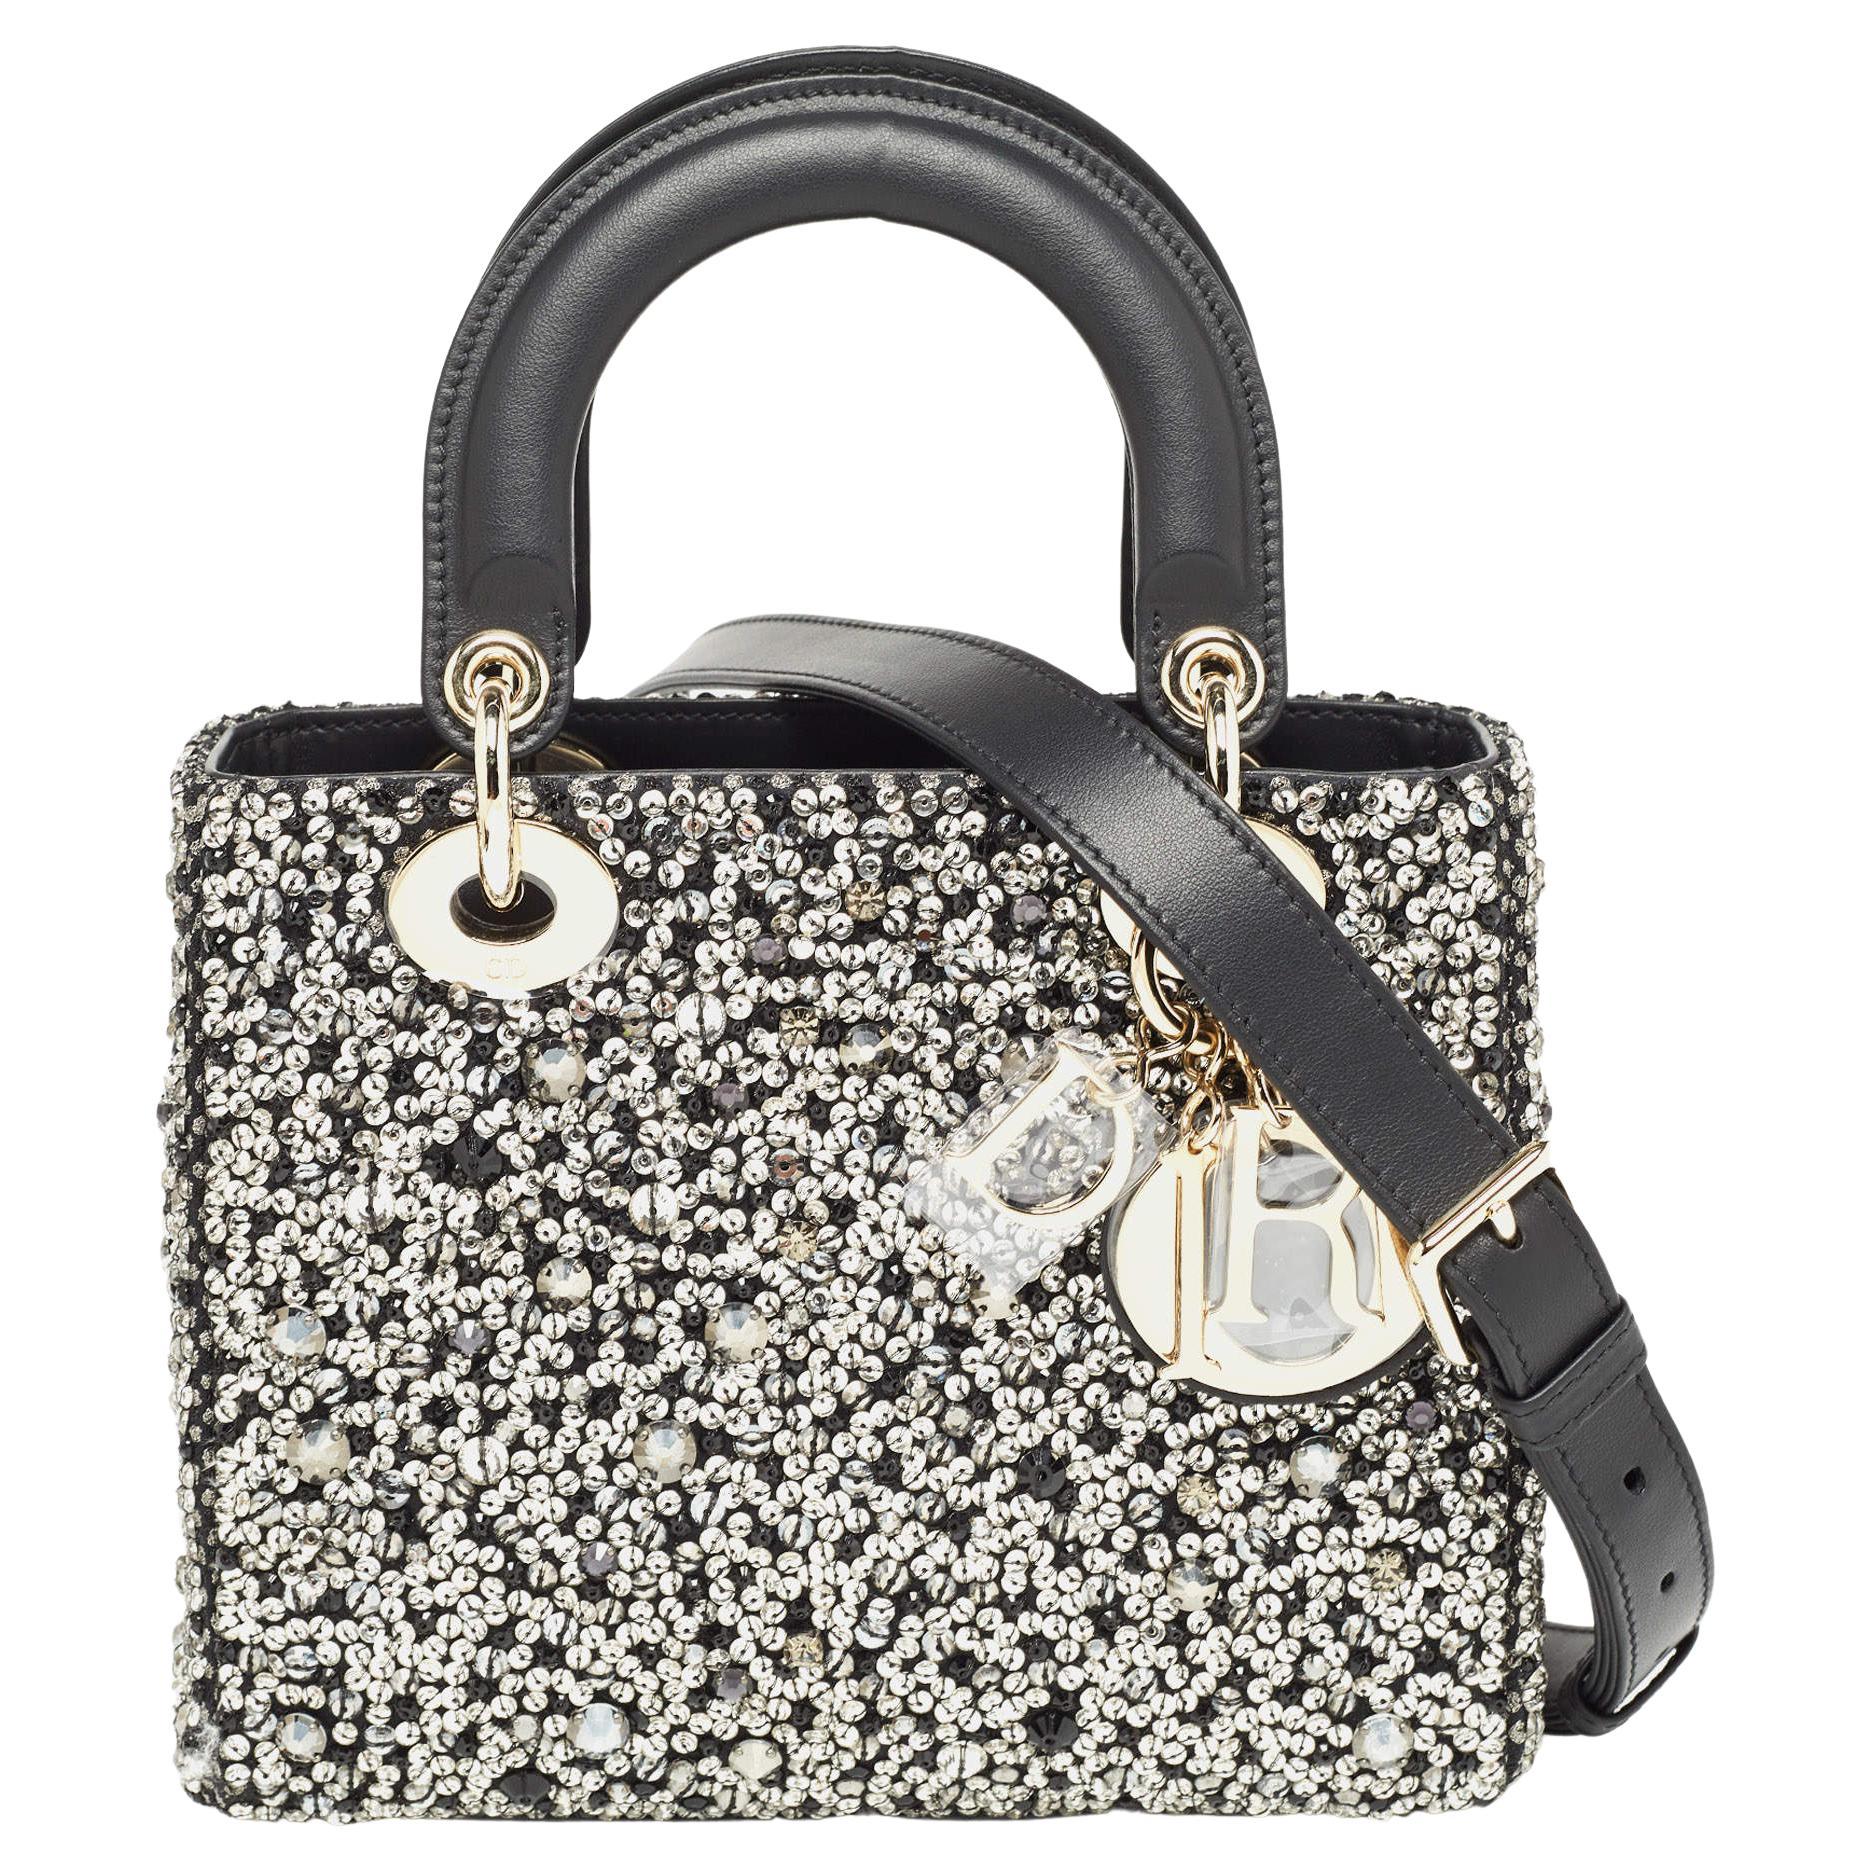 What is Lady Dior made out of?